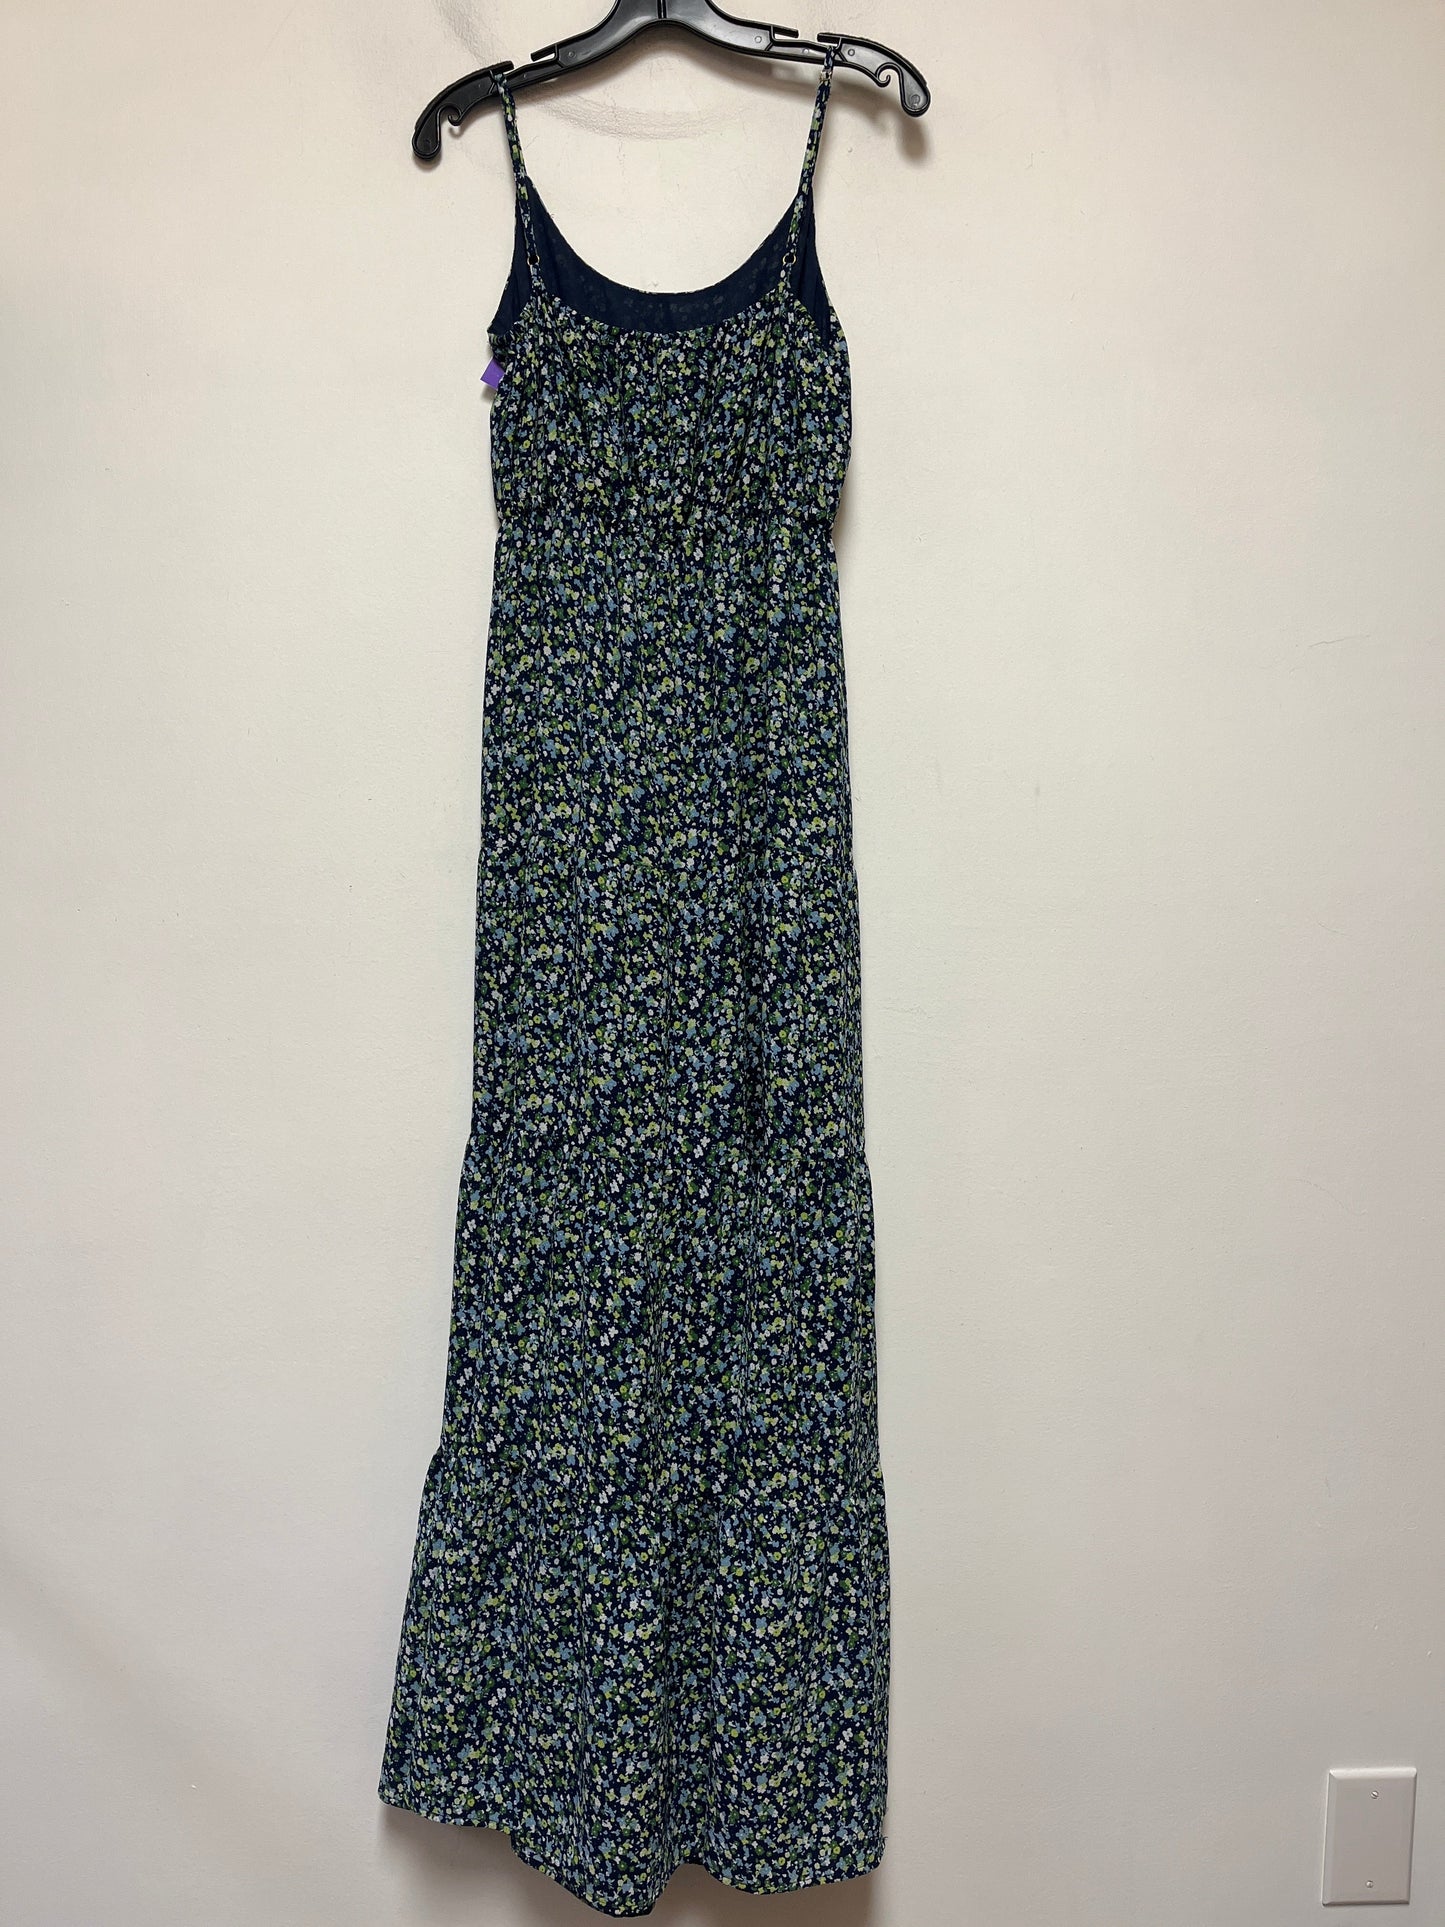 Floral Print Dress Casual Maxi Michael By Michael Kors, Size S